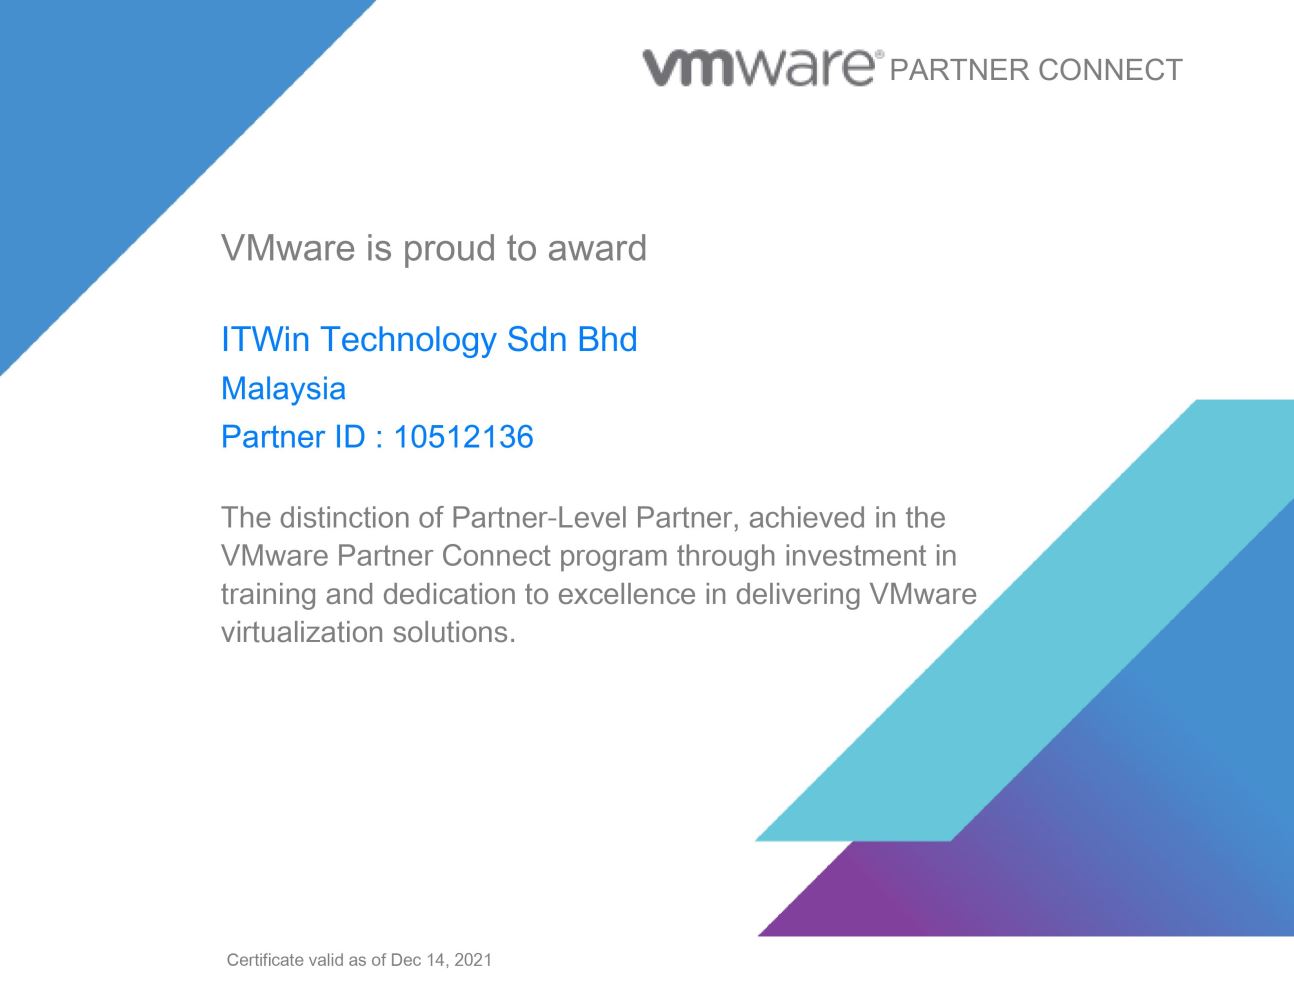 VMware Partner Certificate - ITWin Technology Sdn Bhd